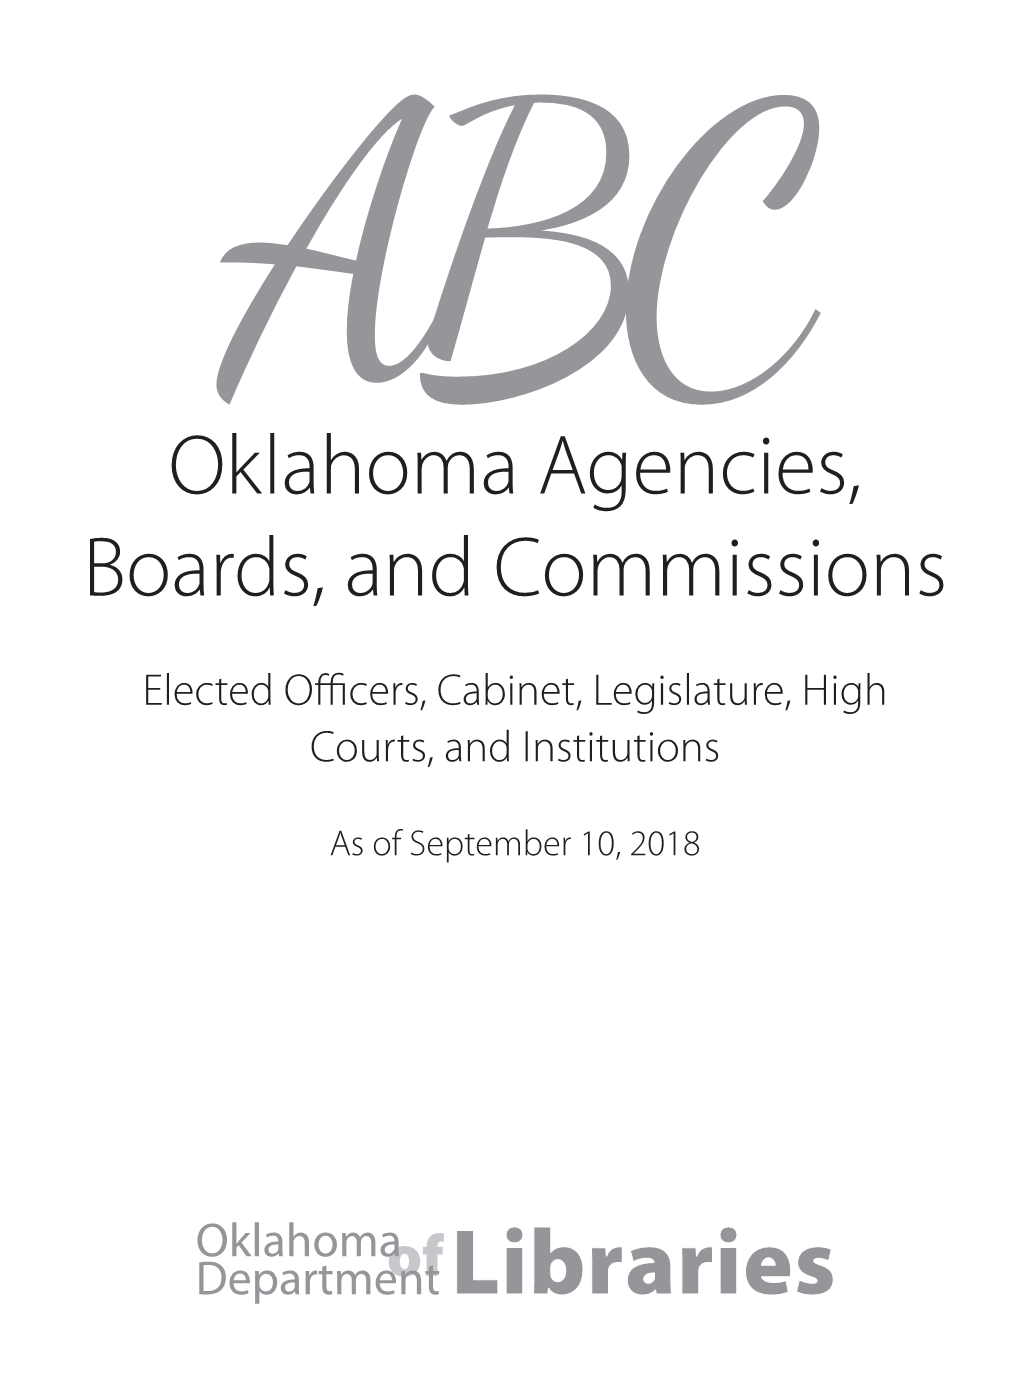 Oklahoma Agencies, Boards, and Commissions